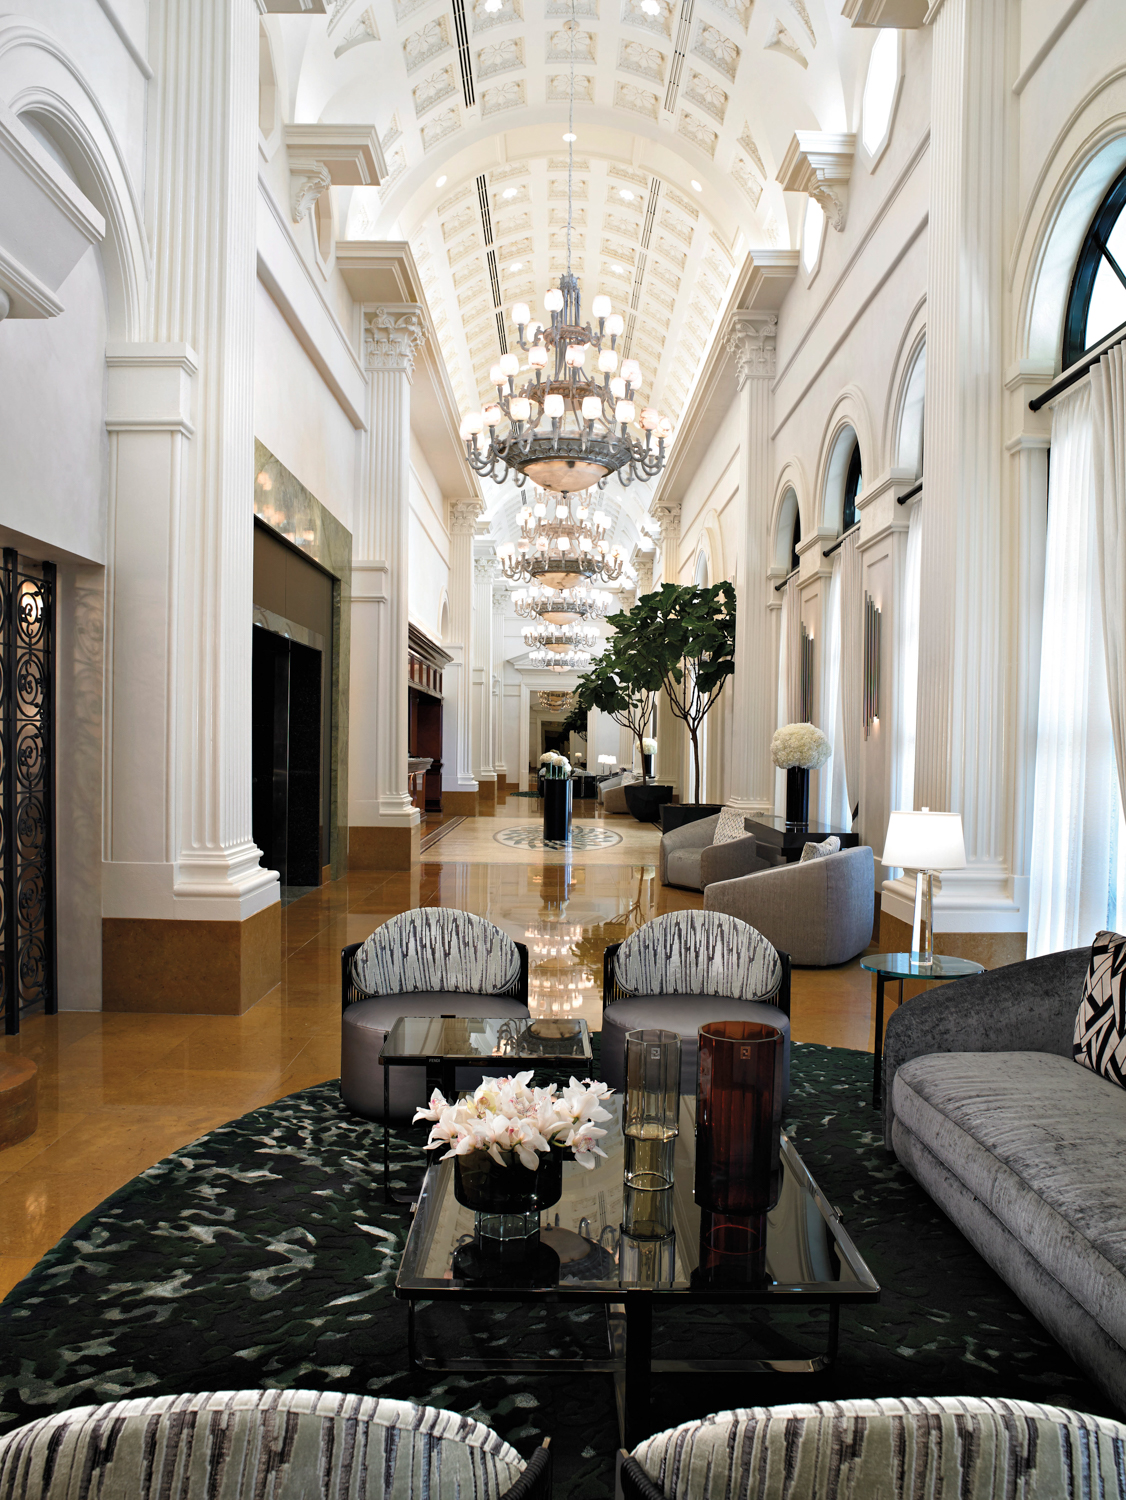 Seating area in a long, white lobby lined with ornate moldings and chandeliers in Acqualina Resort